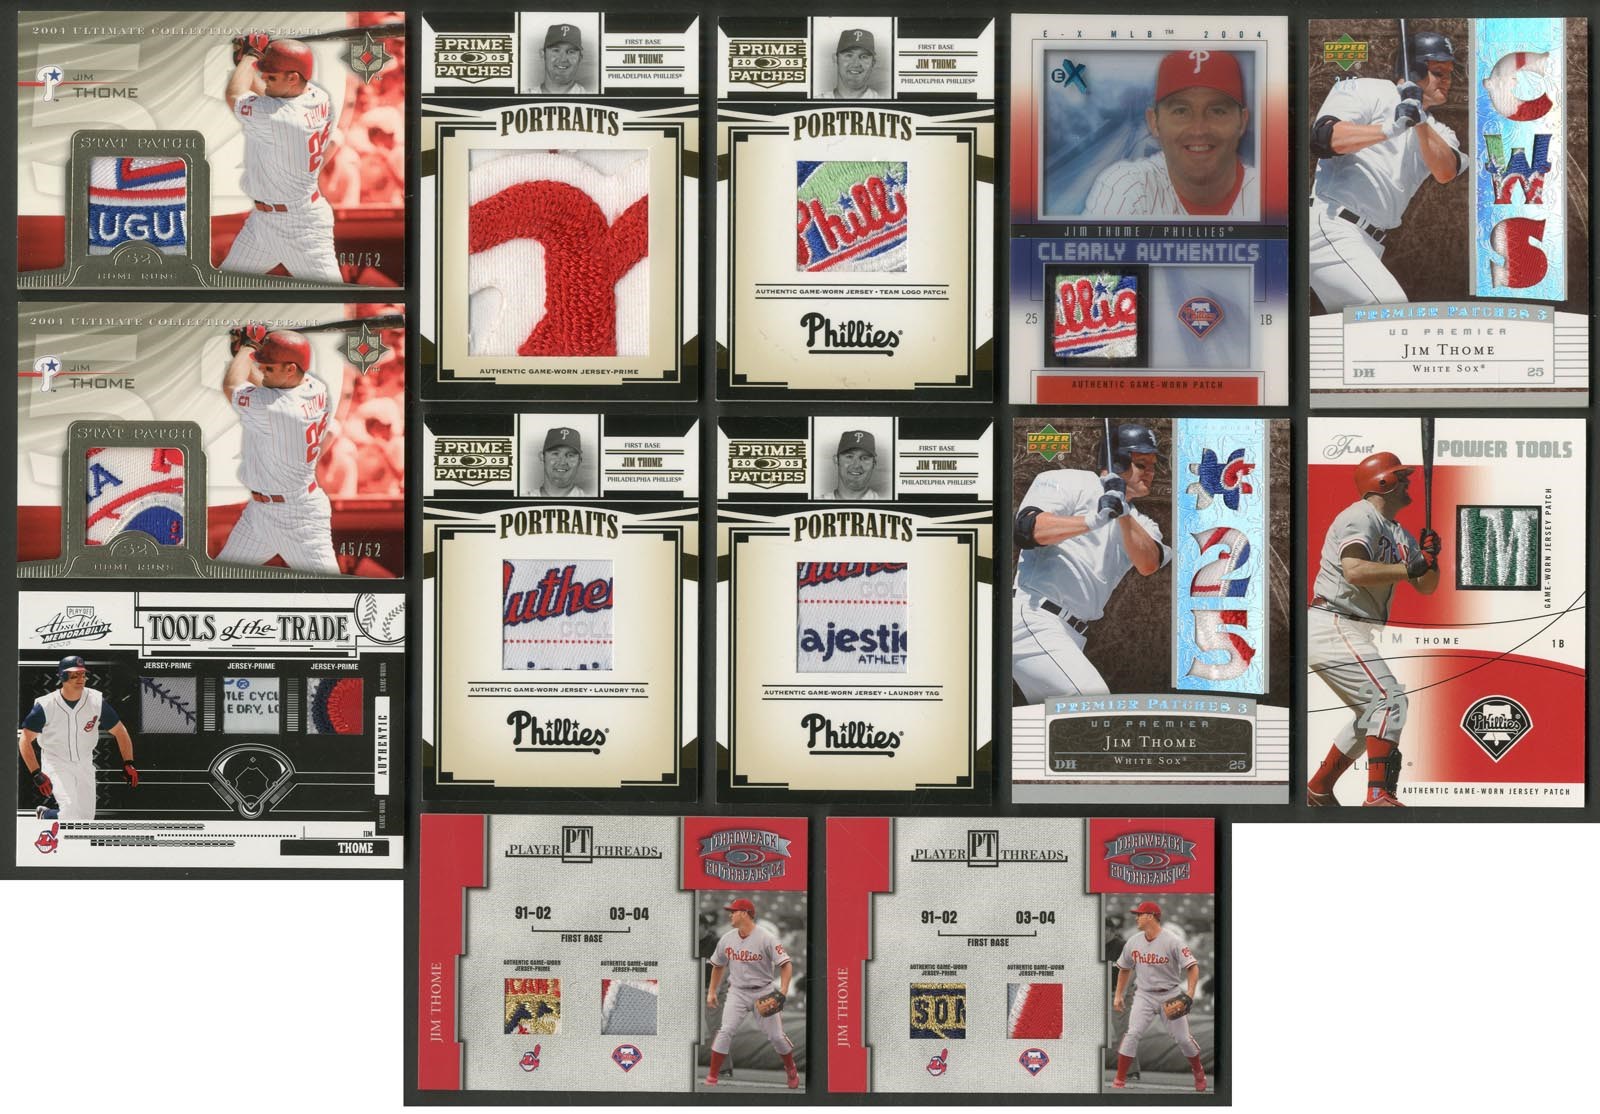 - Huge Jim Thome Modern Insert Game Worn Multi-Color Patch Collection (540+)